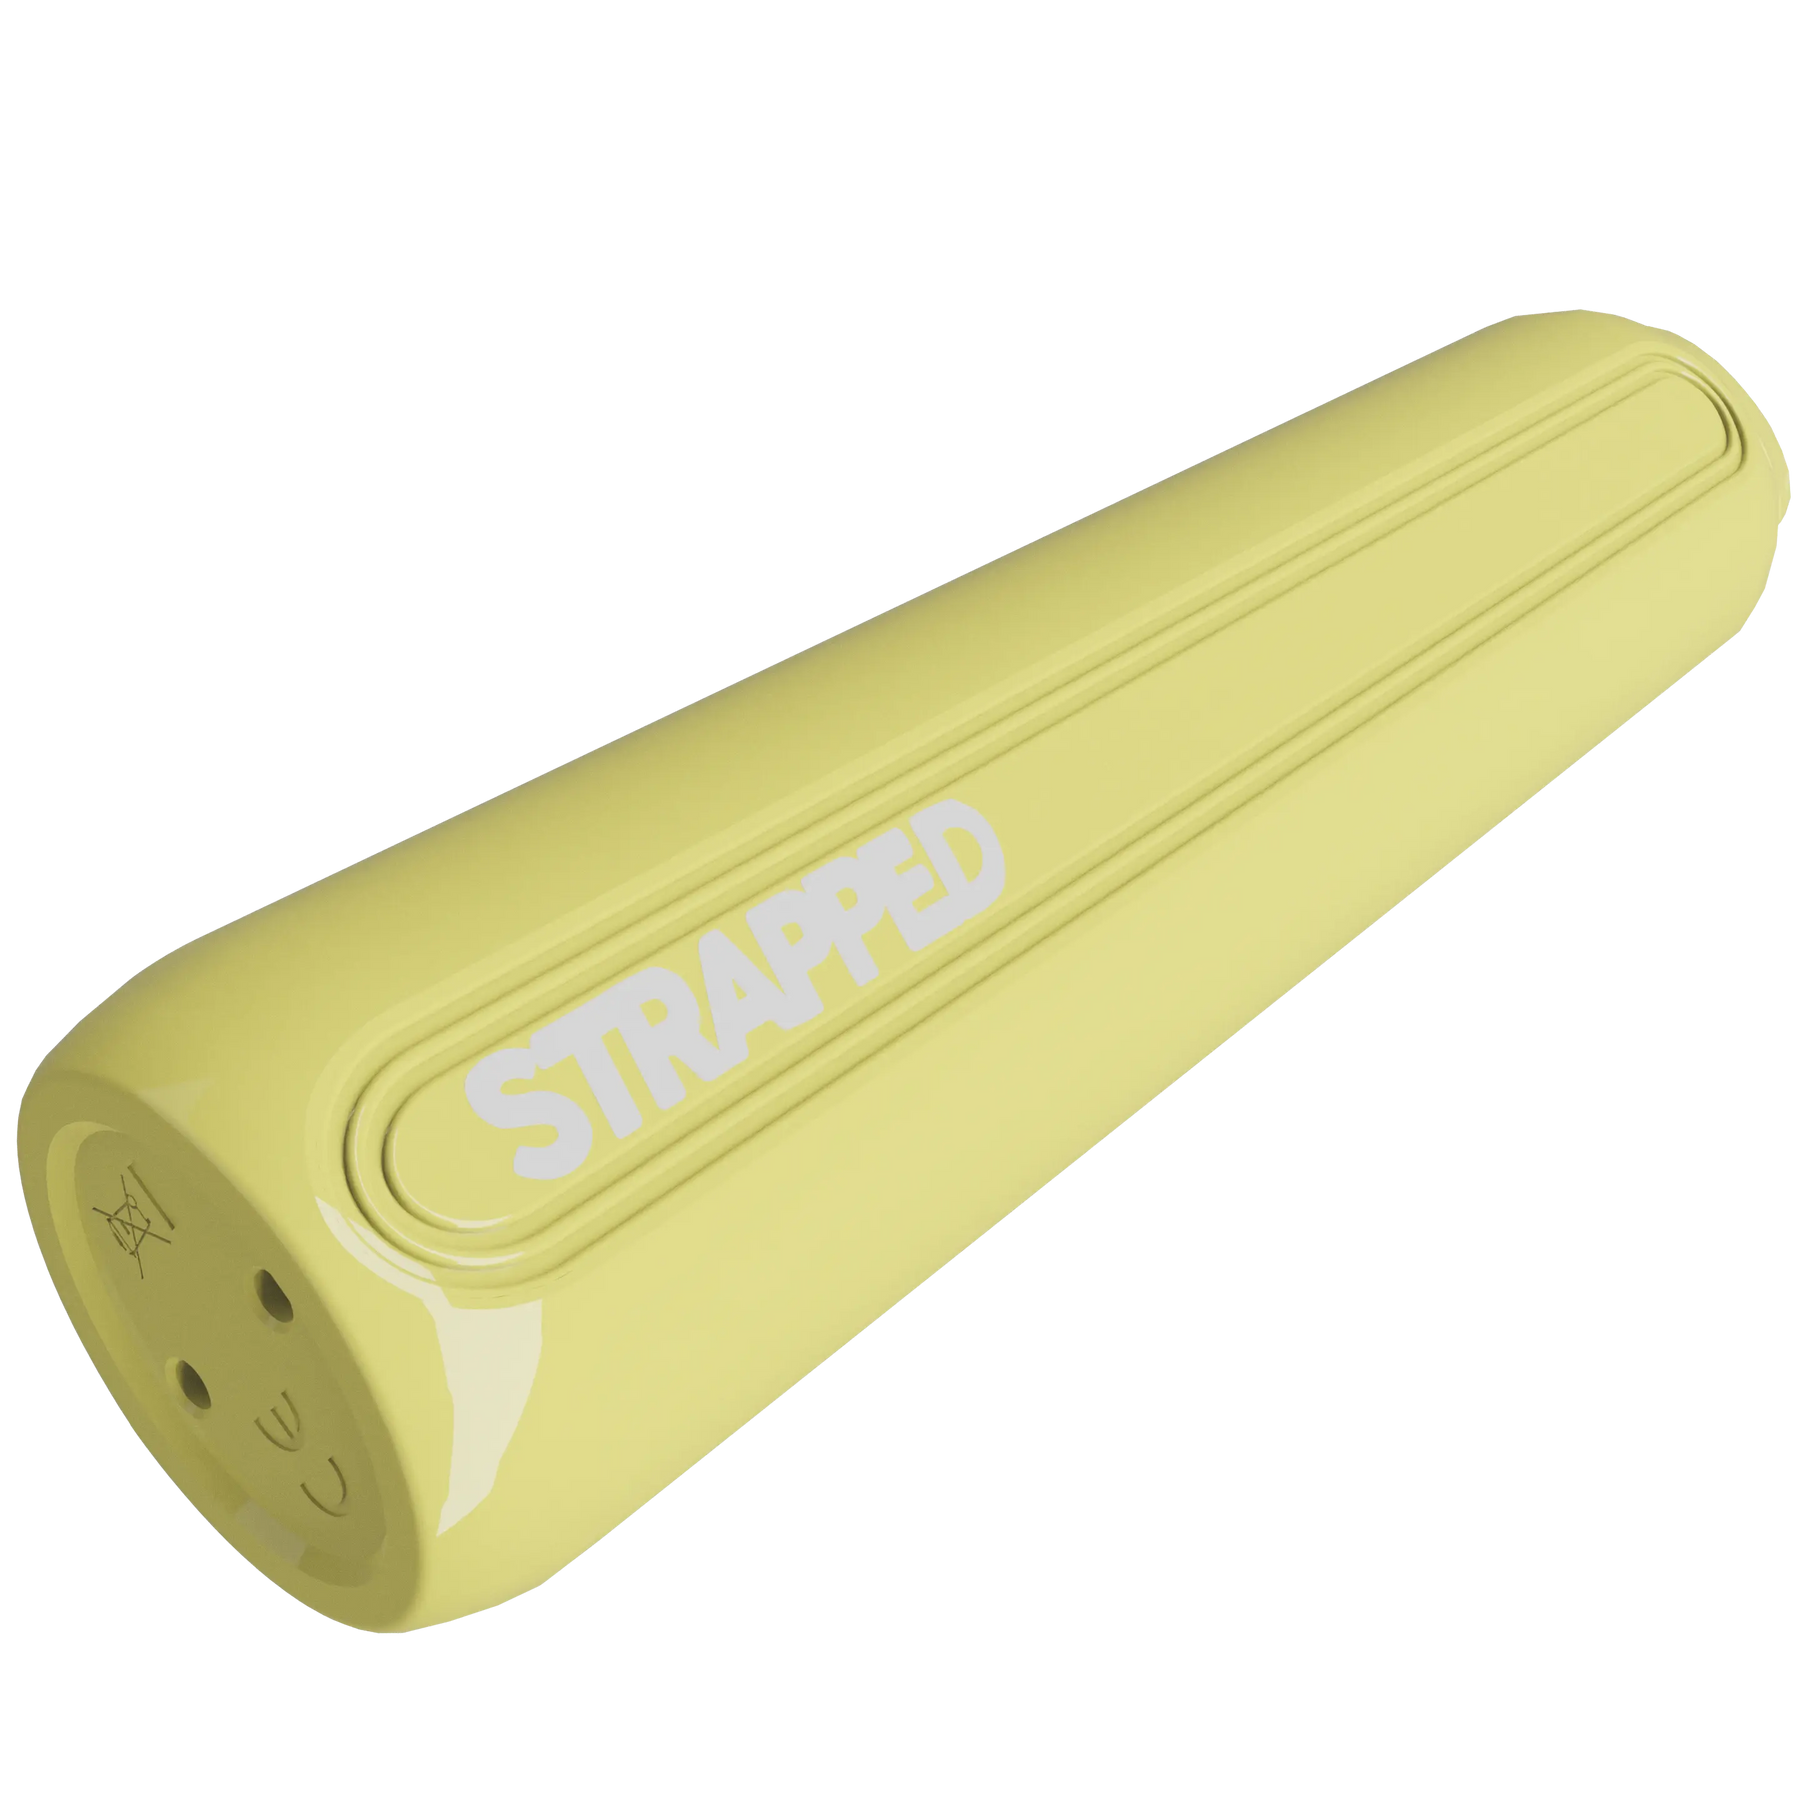 Strapped Stix Disposable Vaping Device | Vanilla Cola